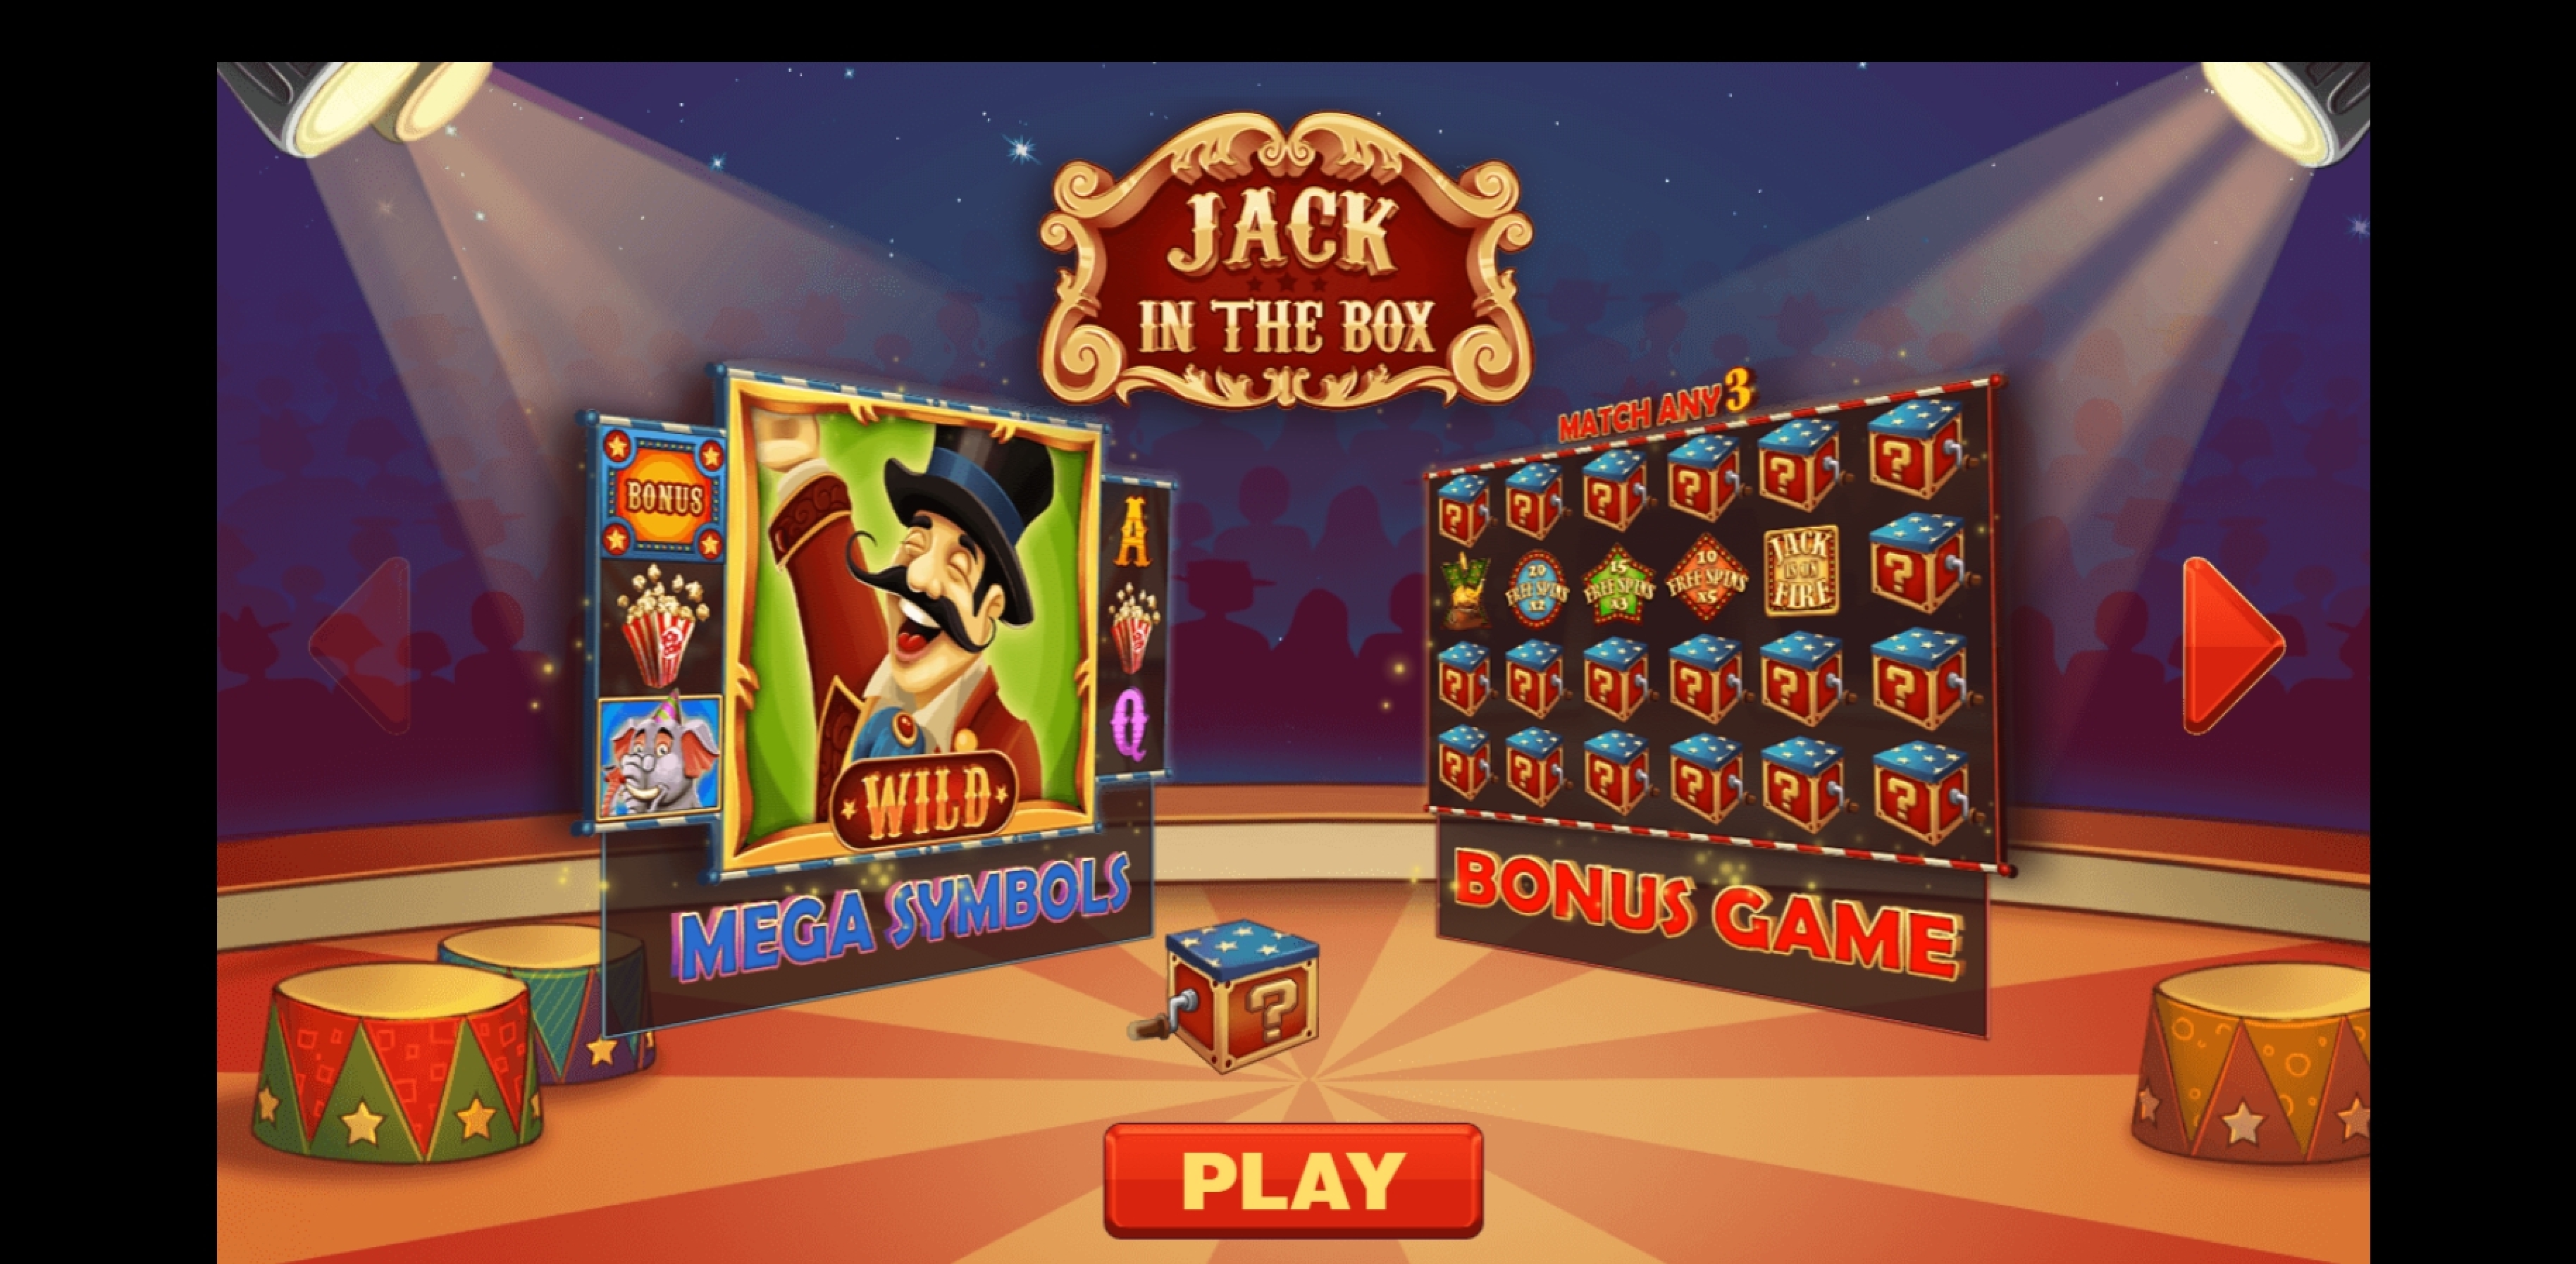 Play Jack in the Box Christmas Edition Free Casino Slot Game by PariPlay